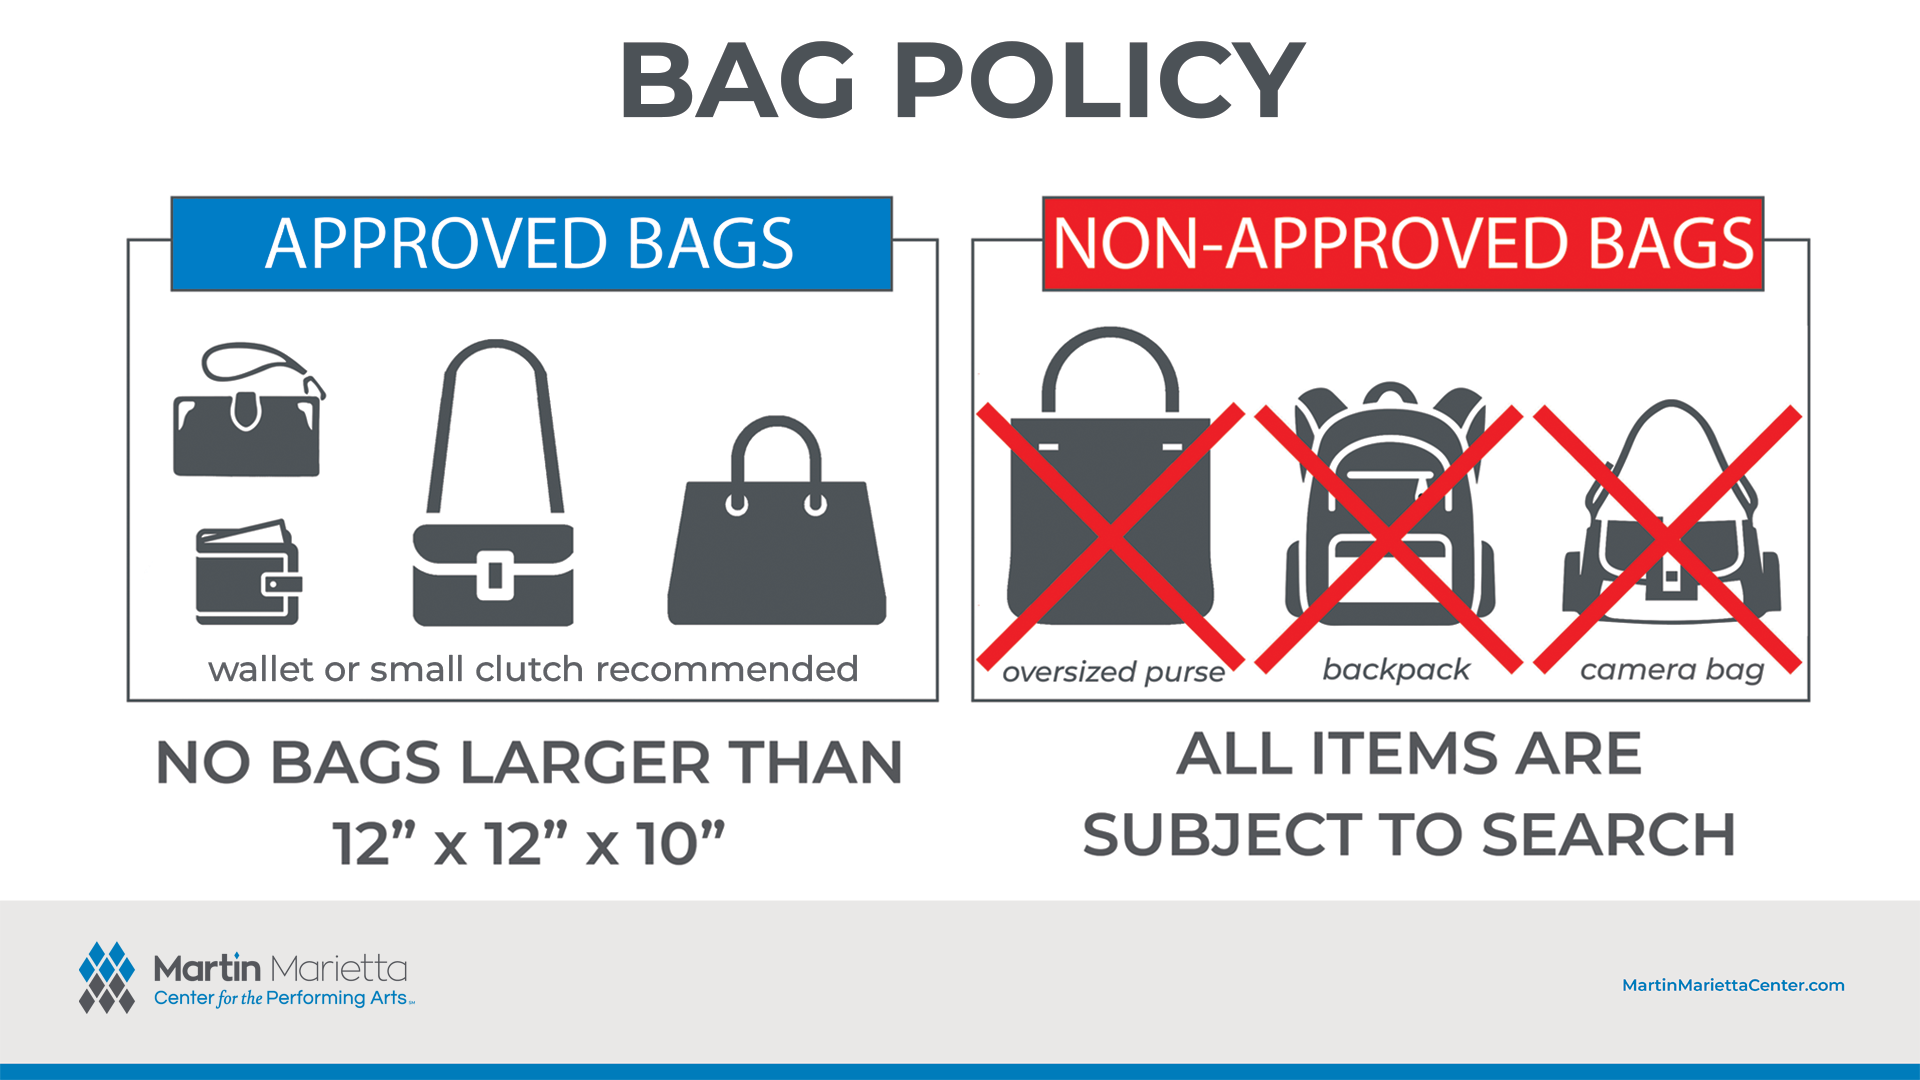 bag policy graphic showing approved and non approved bags icons